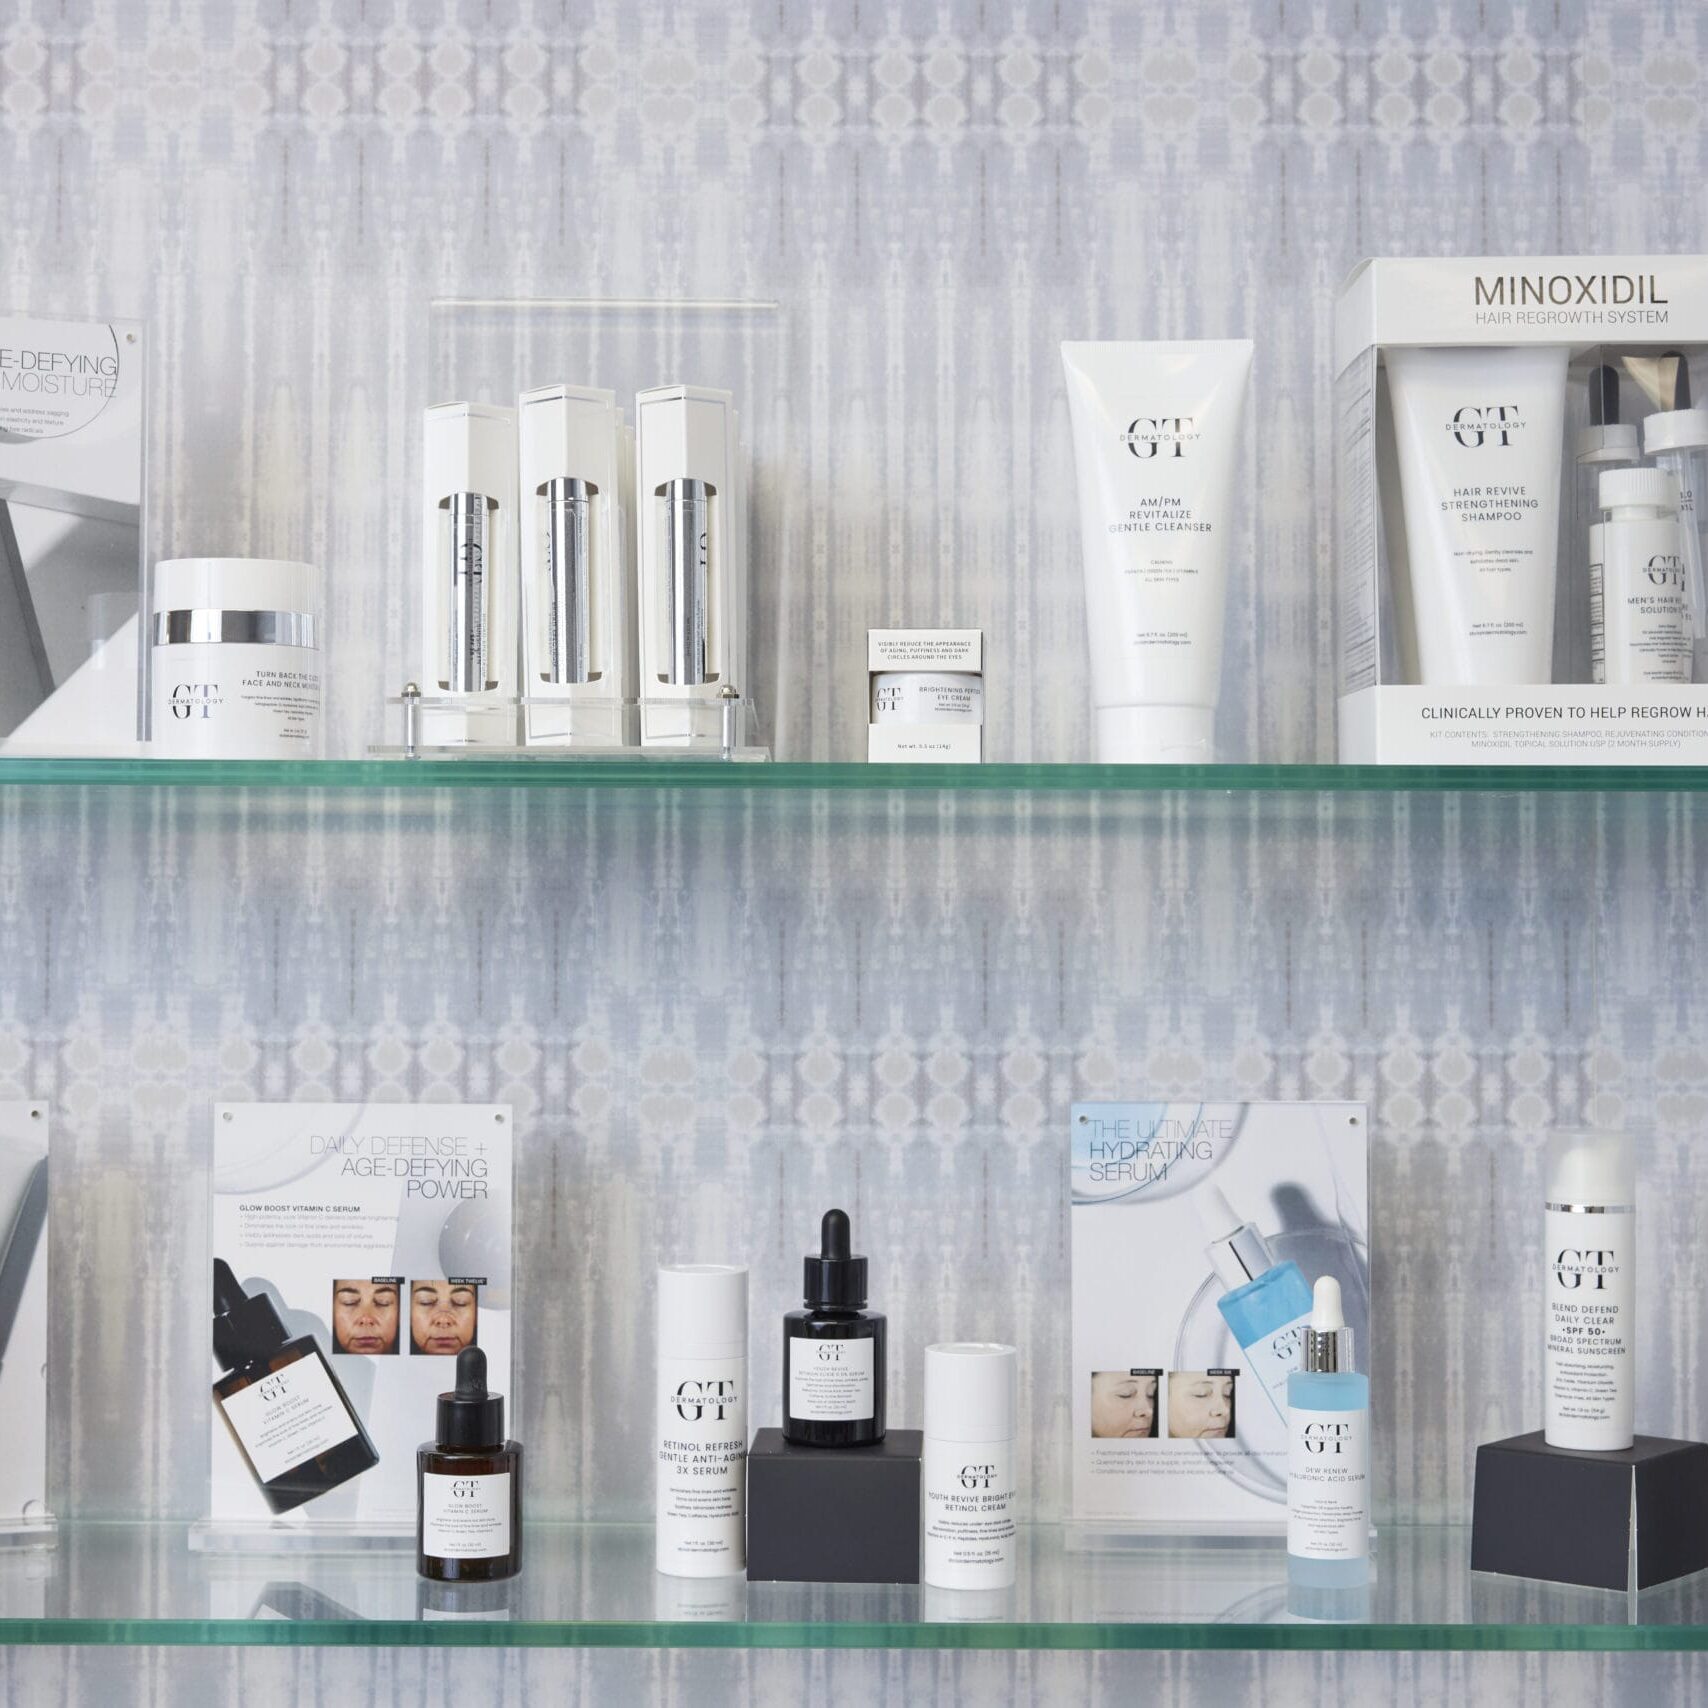 GT Dermatology skincare product selection